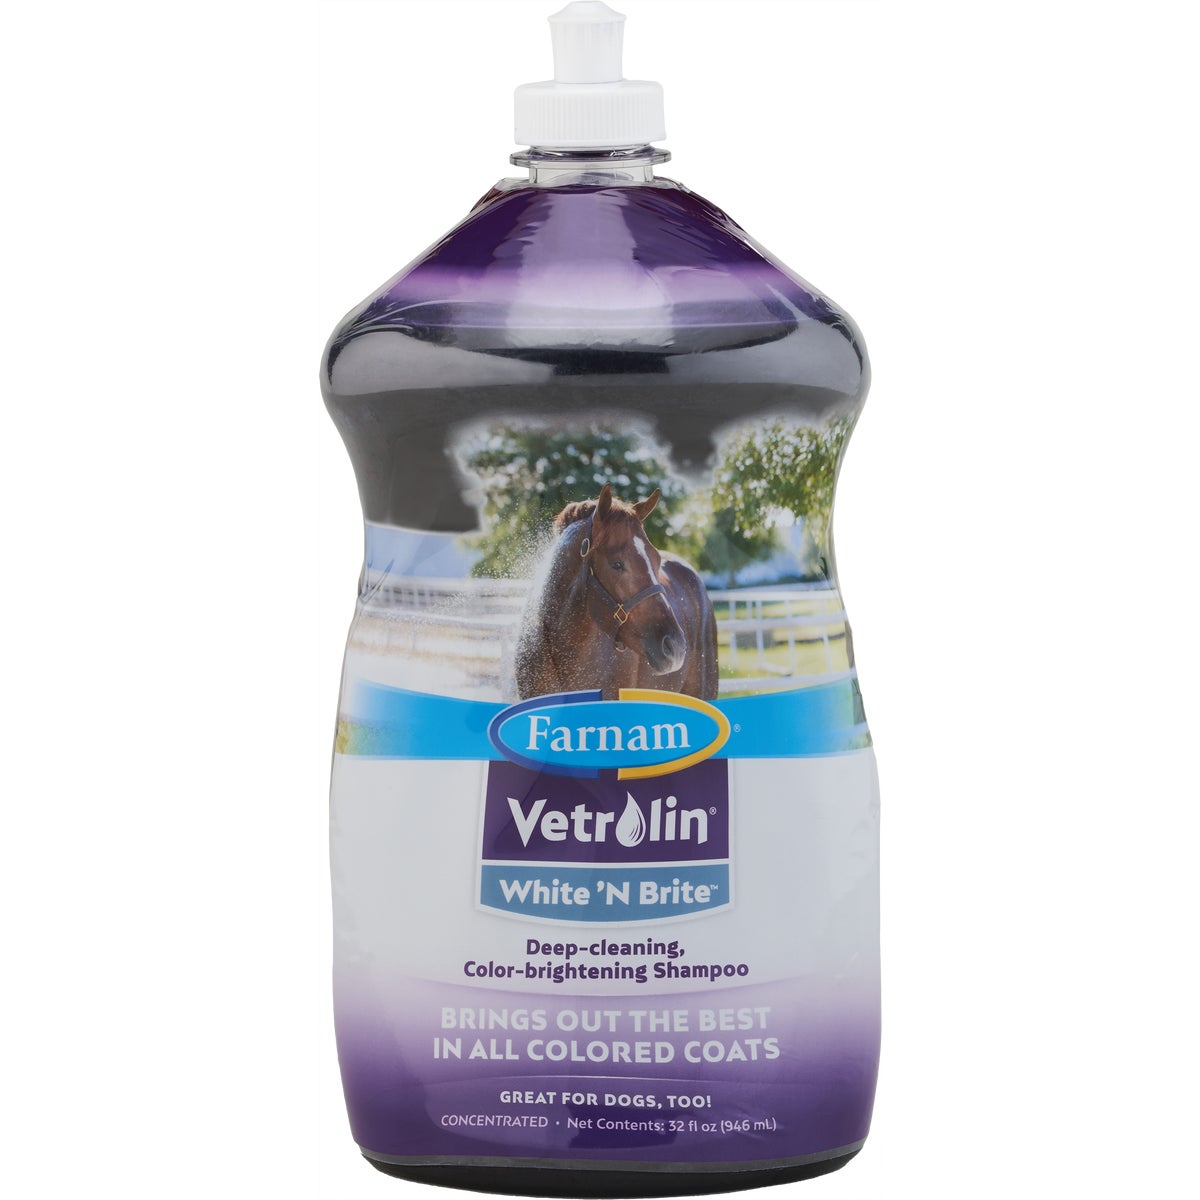 Item 749763, Effective horse shampoo that brings out the best in all colored coats.